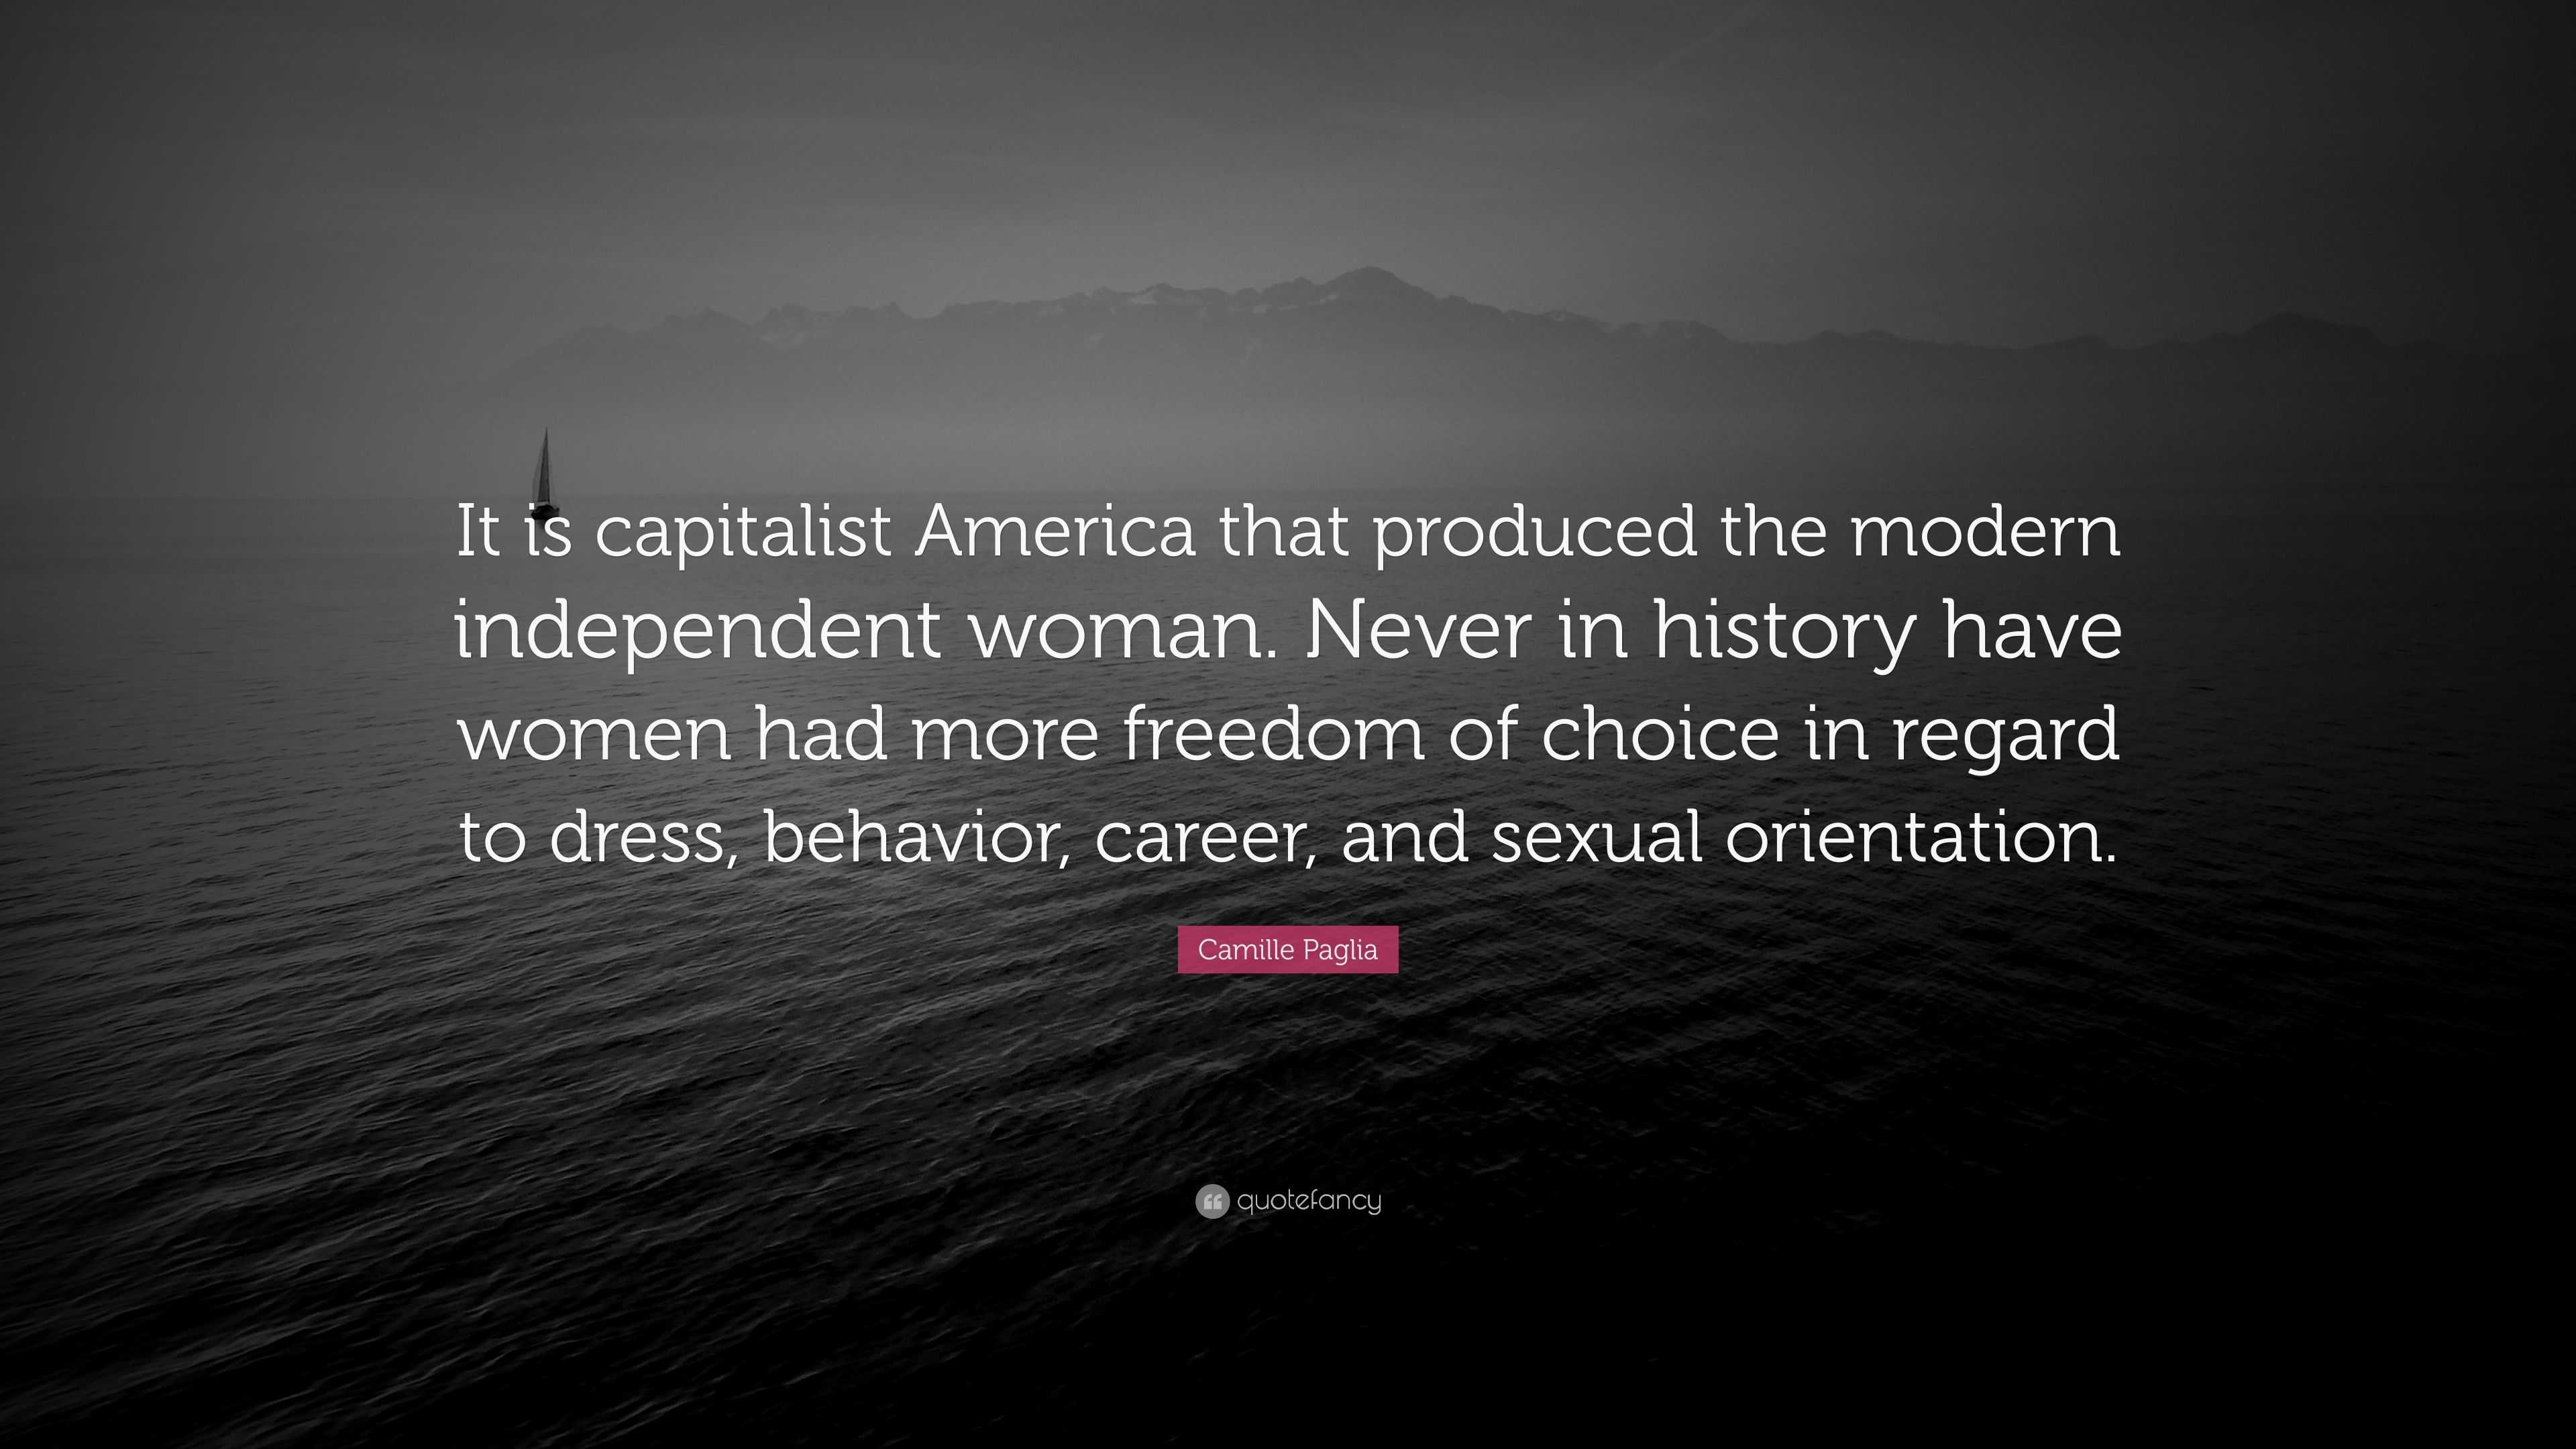 Camille Paglia Quote: “It is capitalist America that produced the ...